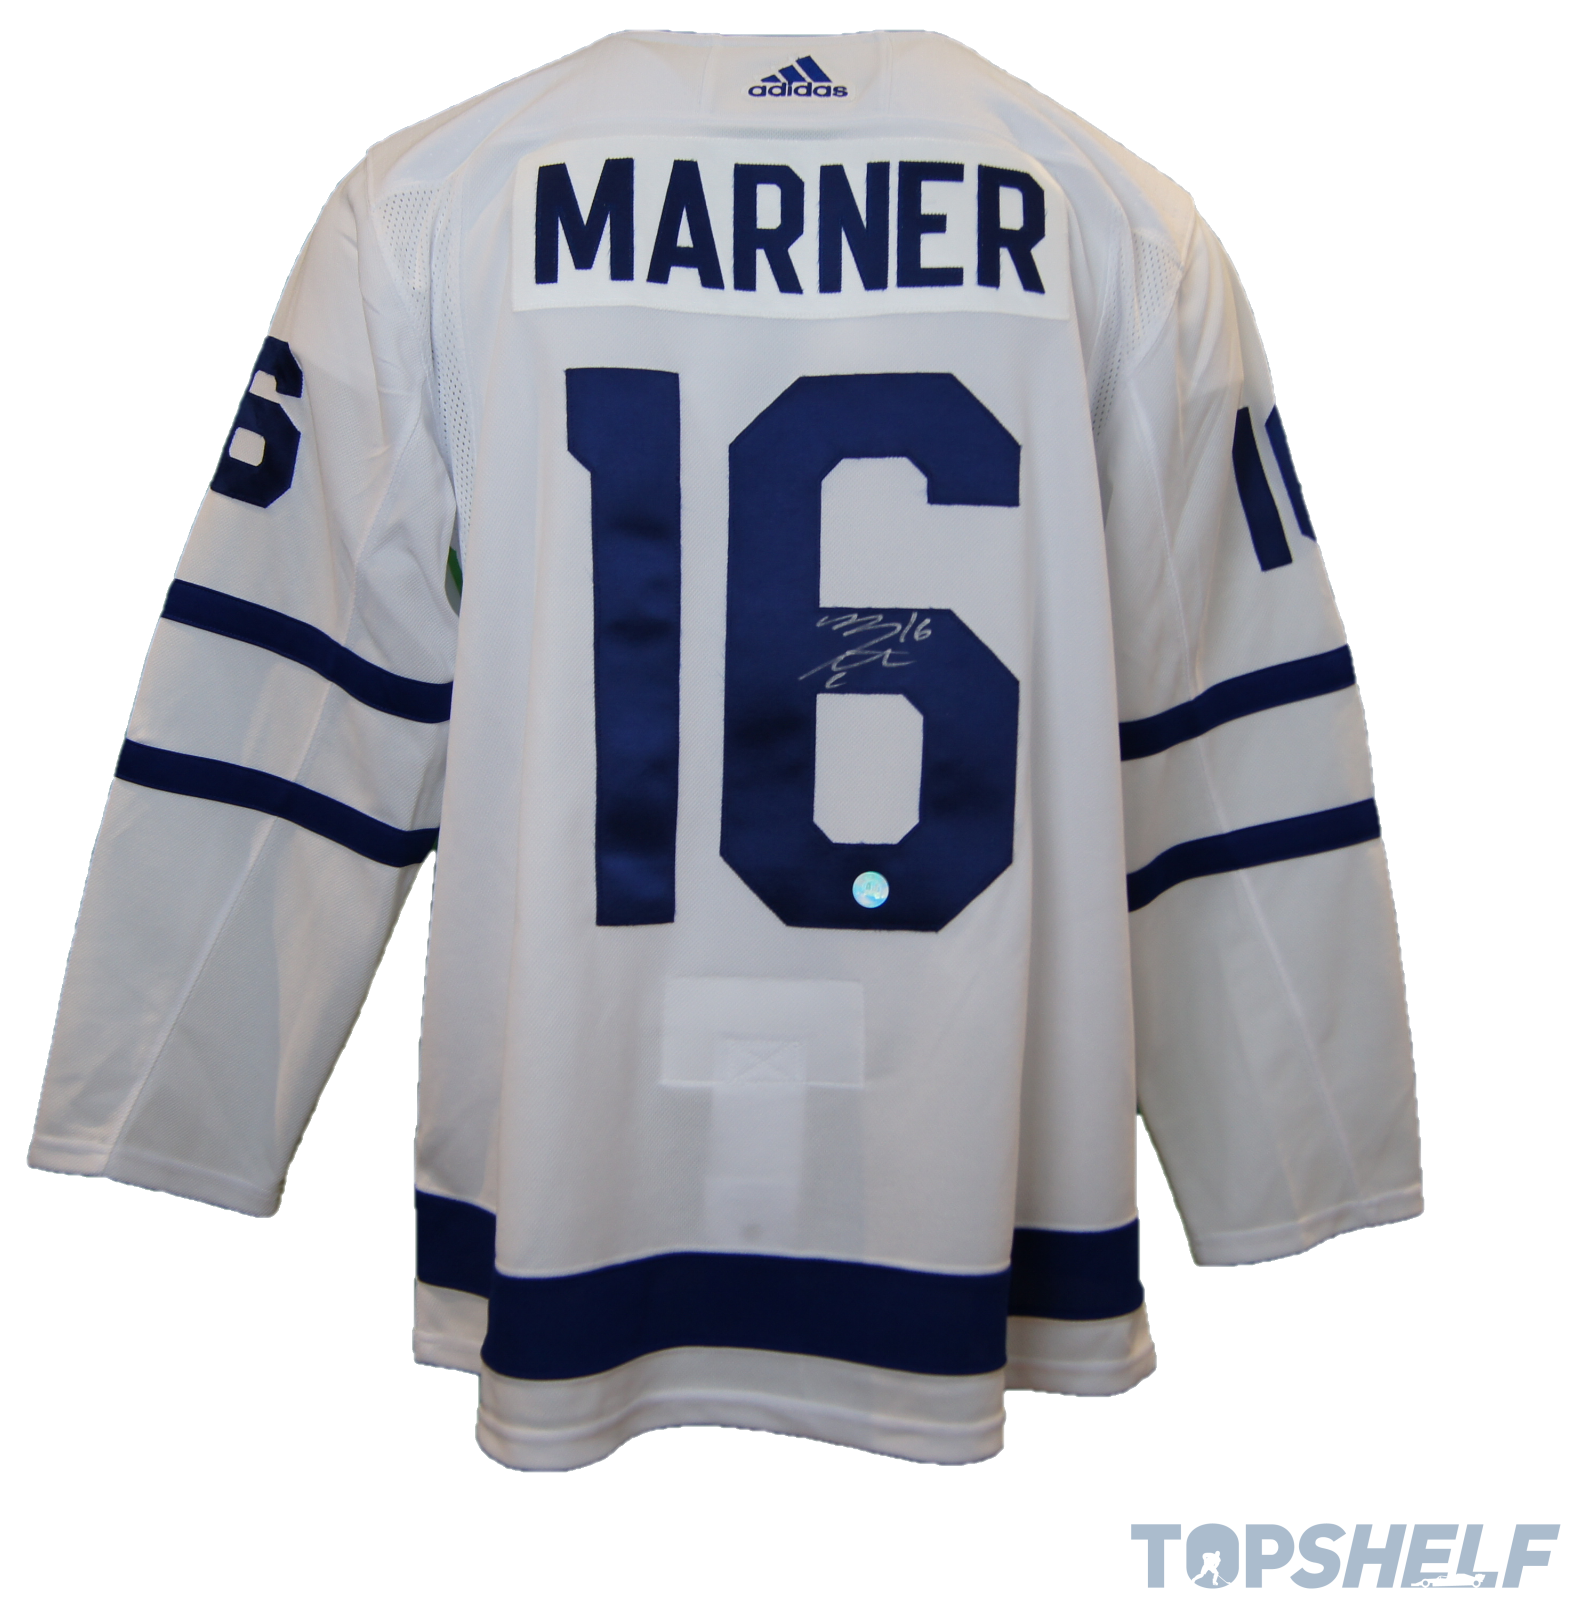 Mitch Marner Toronto Maple Leafs Autographed Signed Adidas Jersey